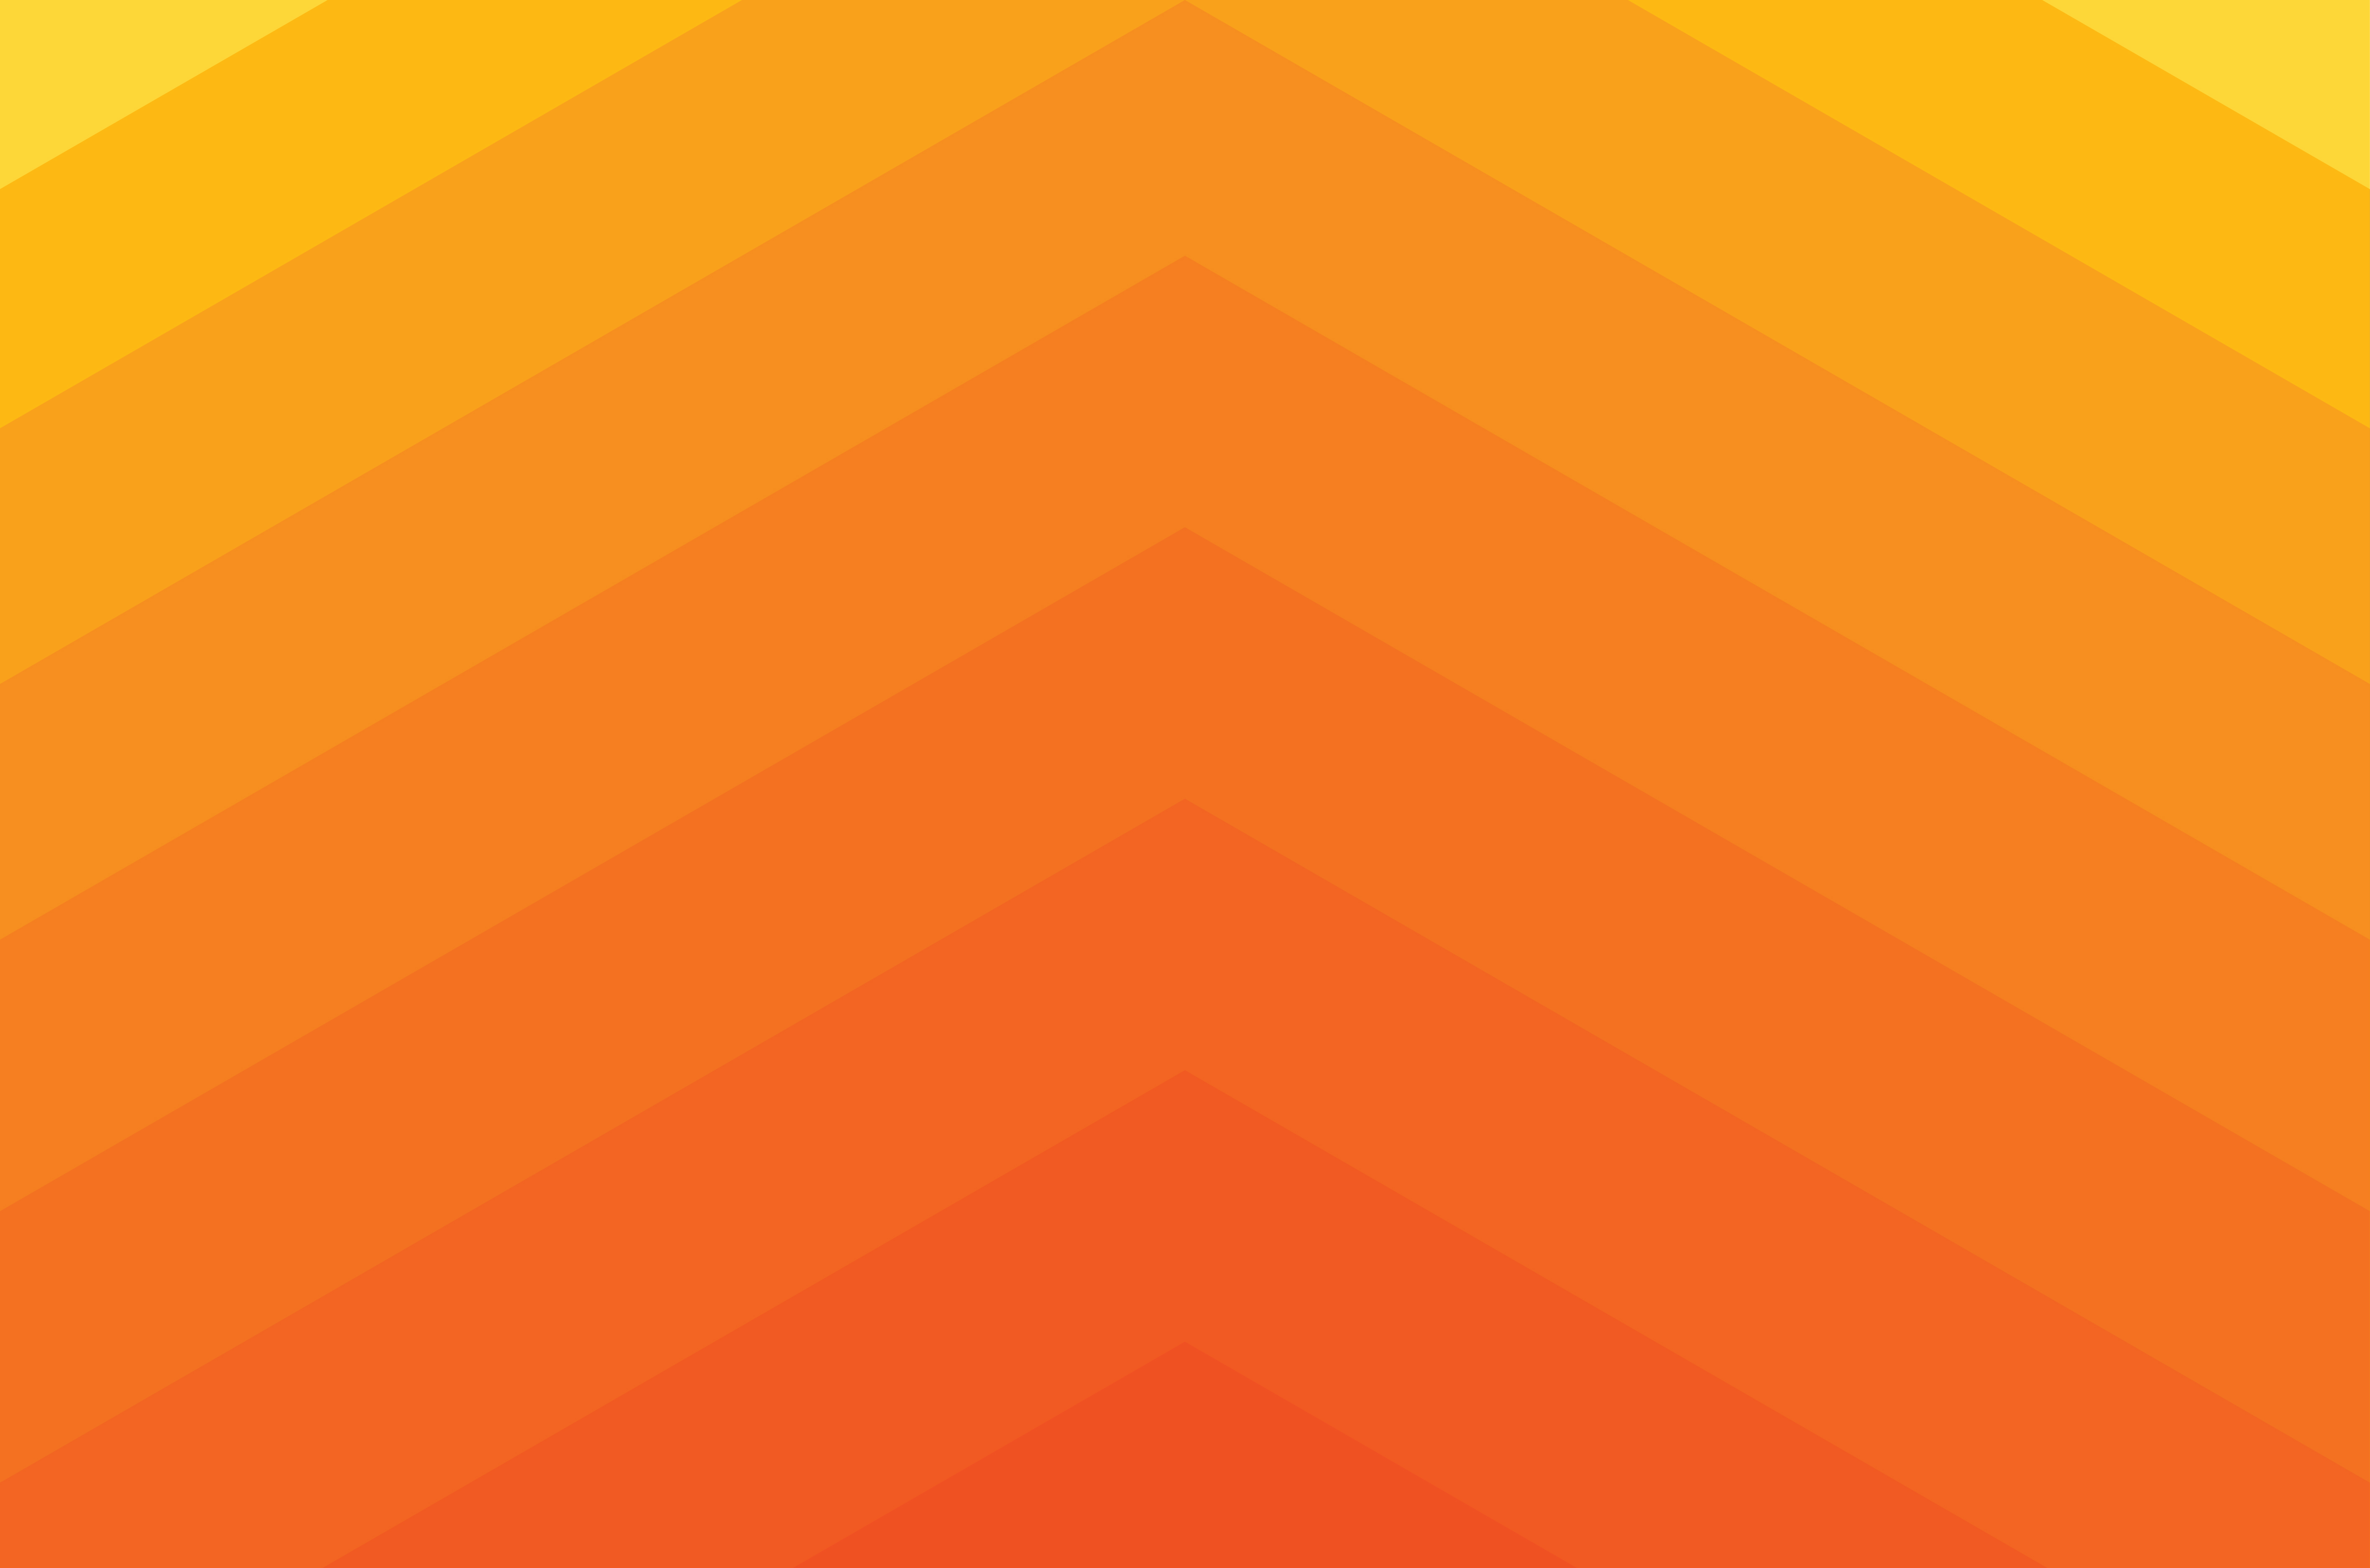 Abstract Orange Background - Free images and graphic designs